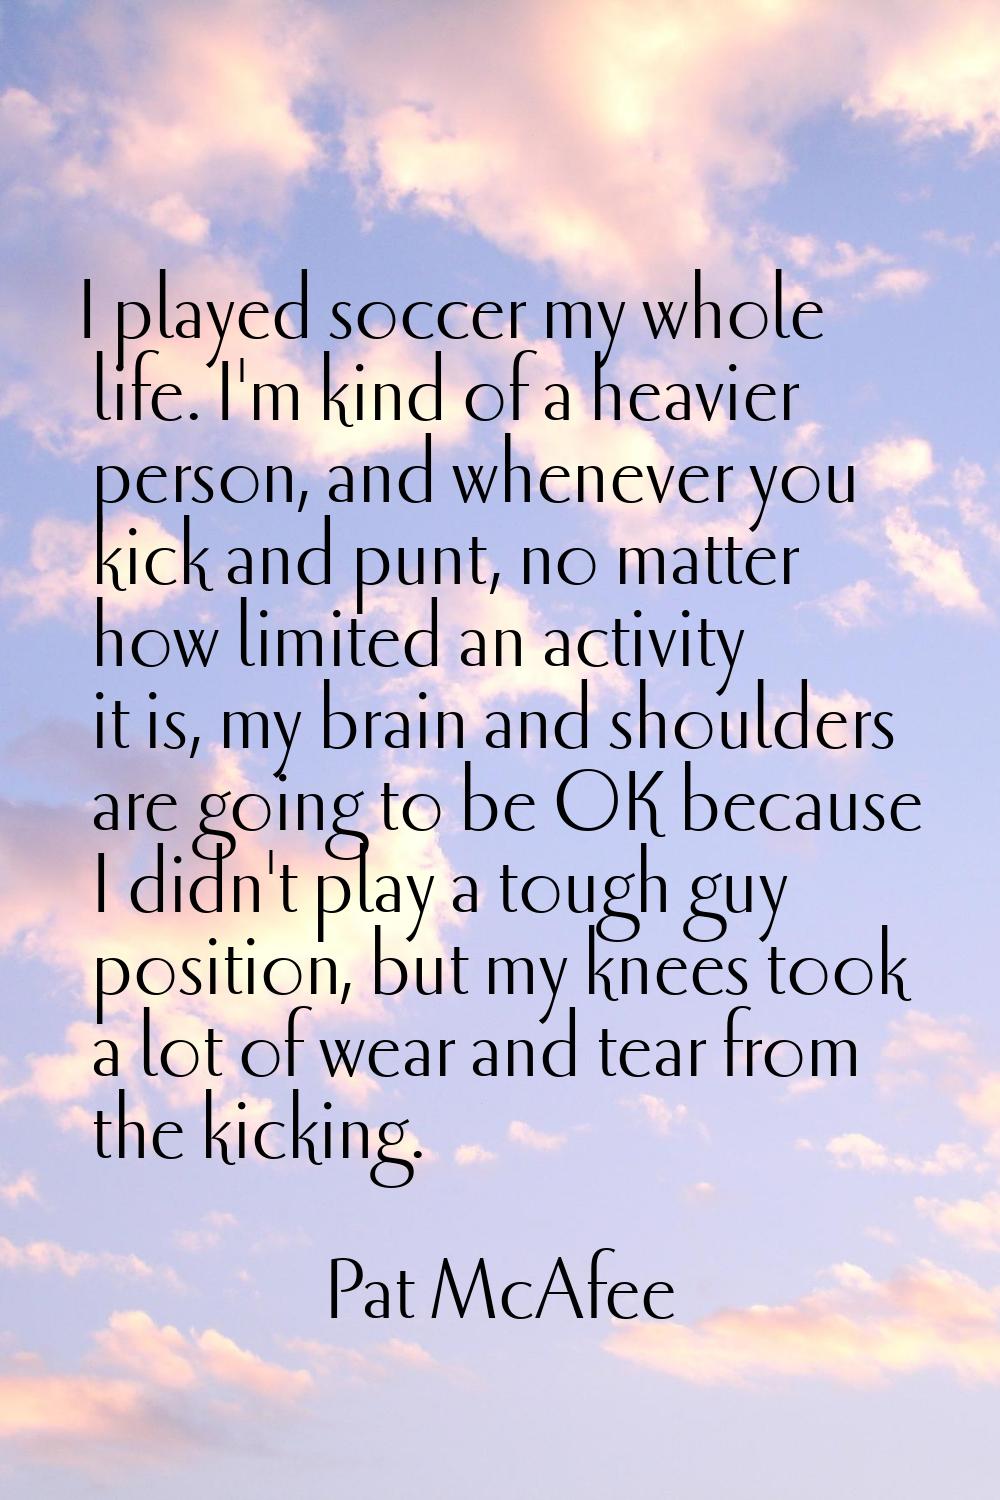 I played soccer my whole life. I'm kind of a heavier person, and whenever you kick and punt, no mat